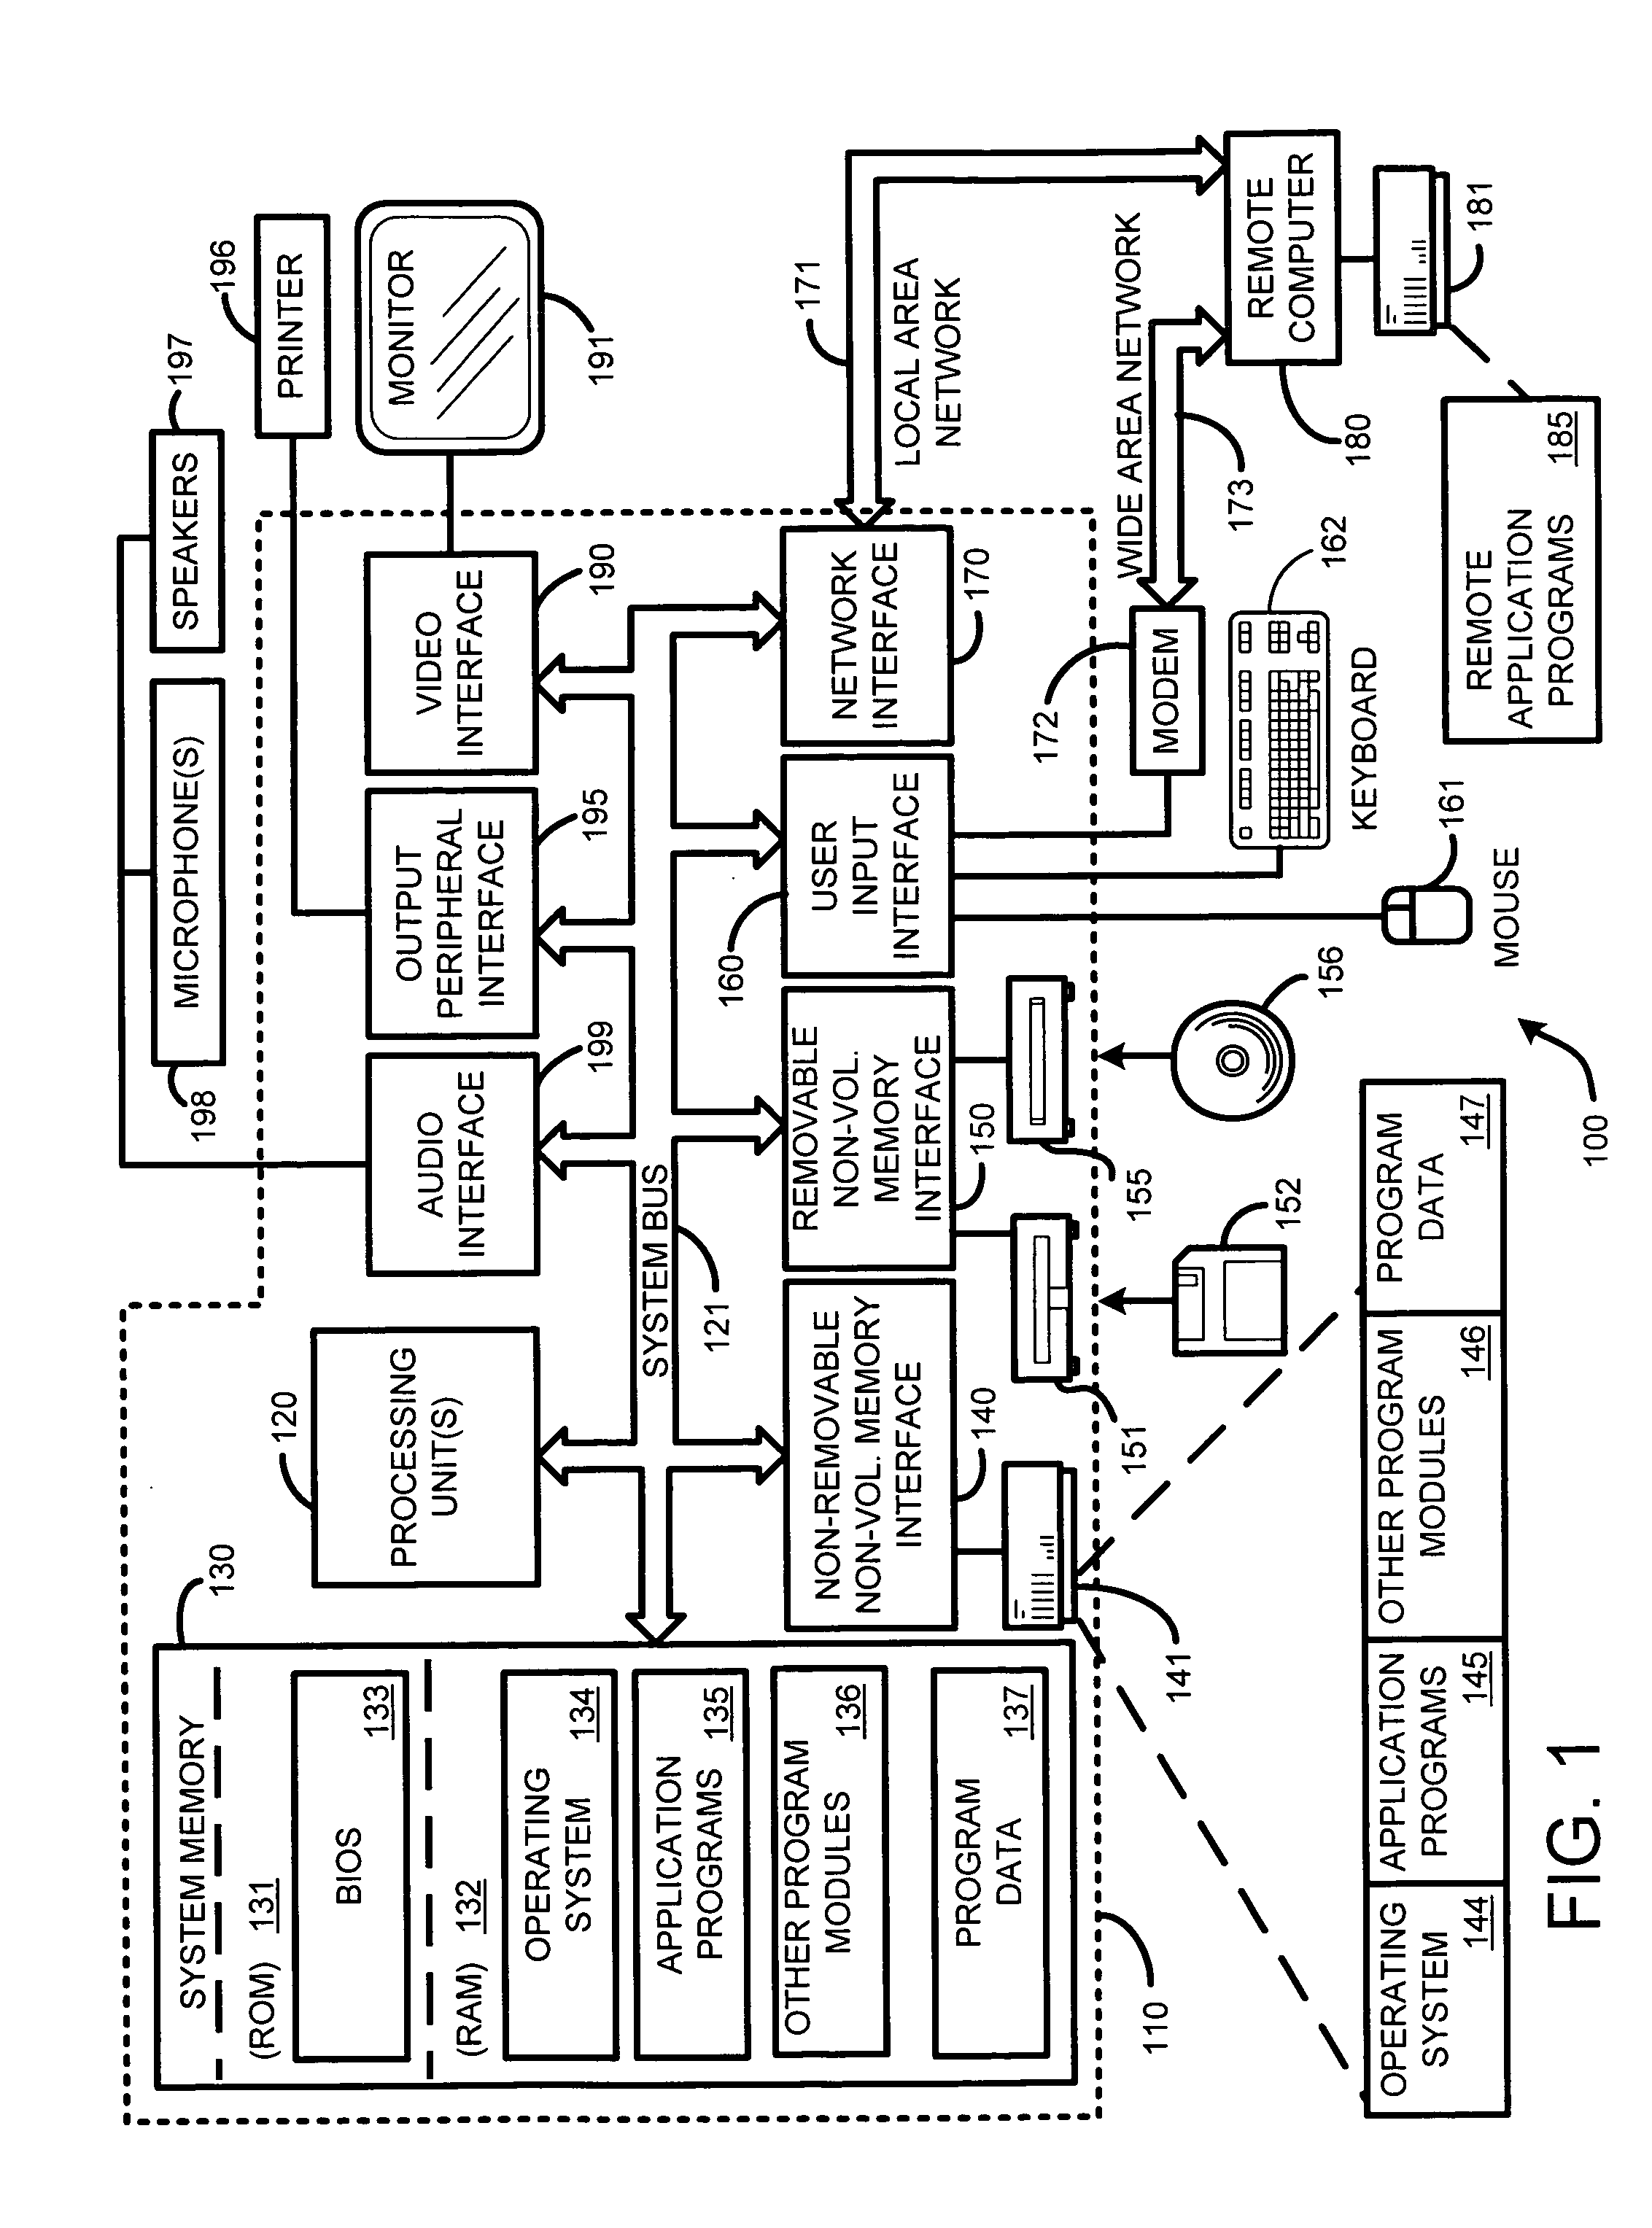 Multi-input channel and multi-output channel echo cancellation